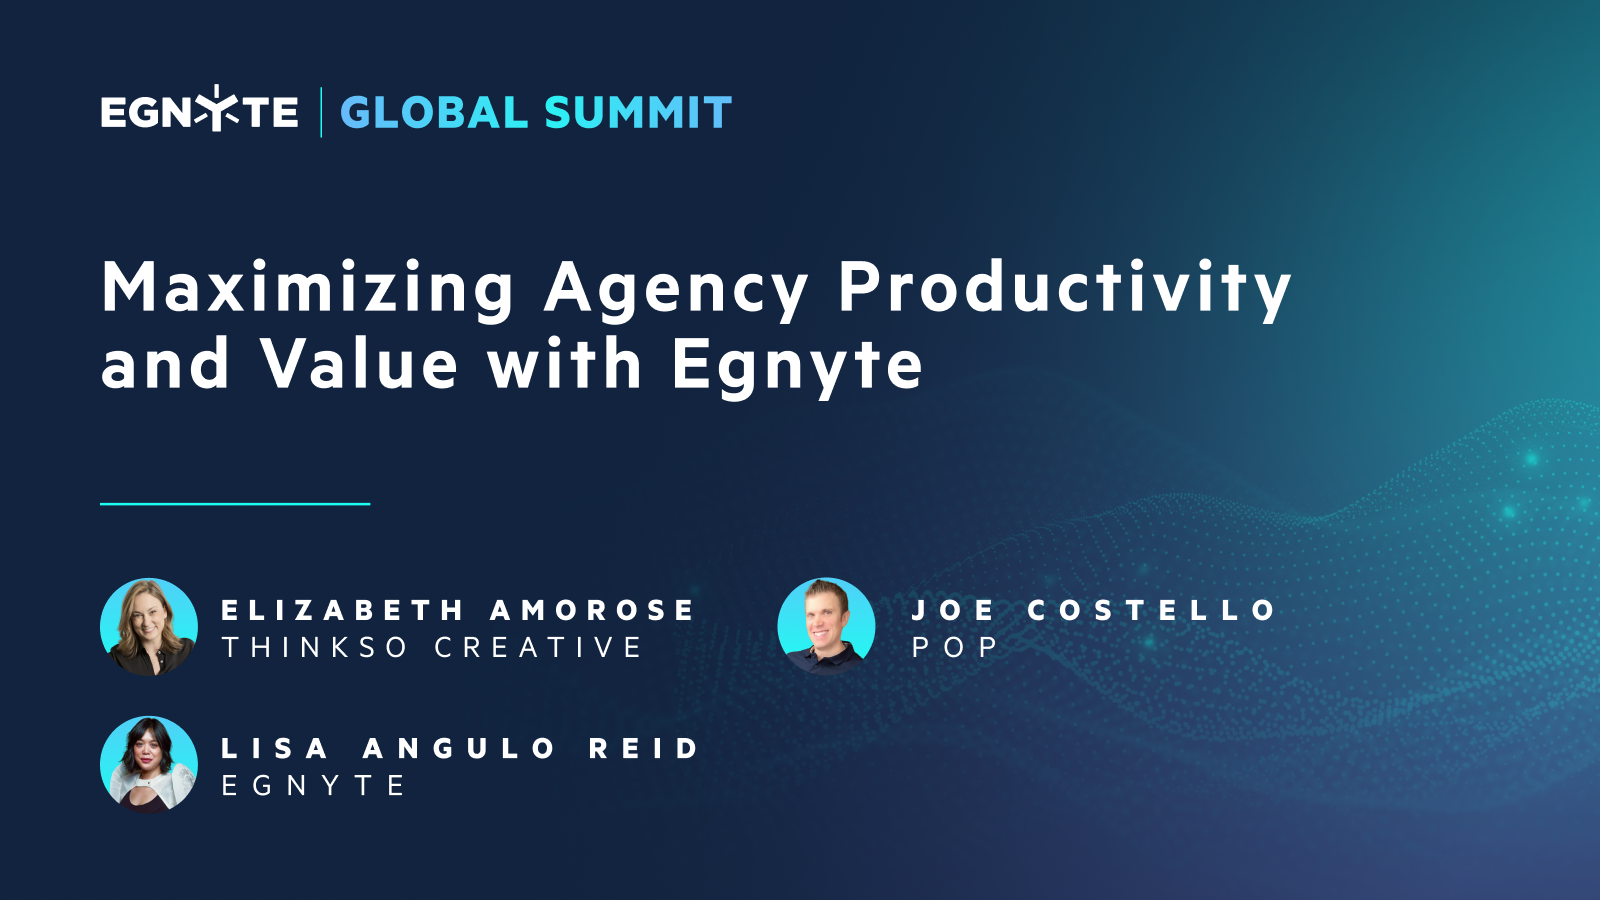 AP 1 - Maximizing Agency Productivity and Value with Egnyte